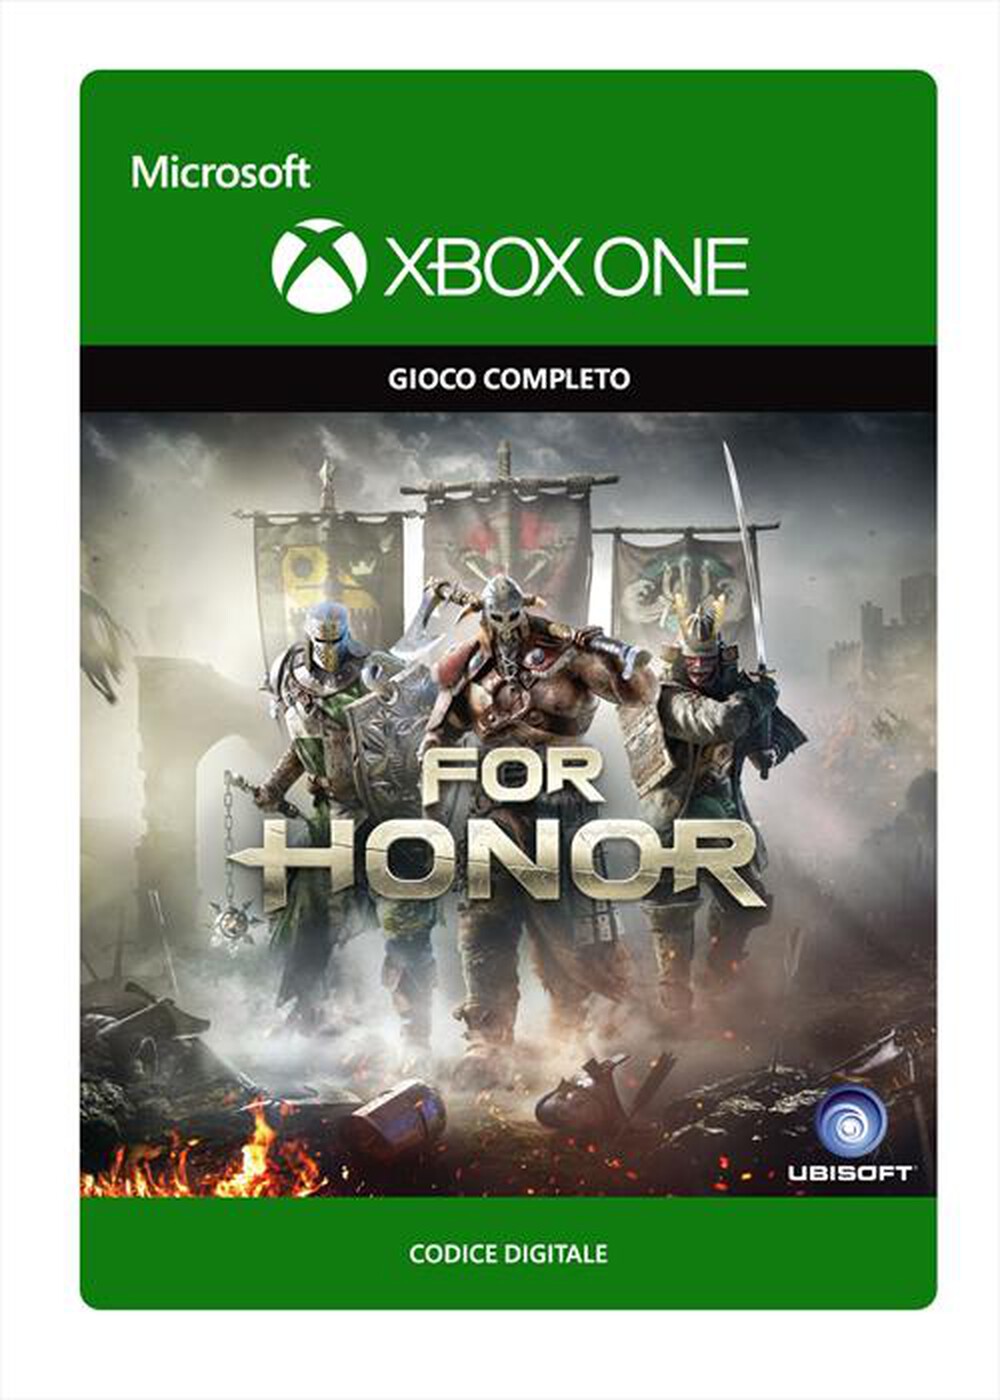 "MICROSOFT - For Honor: Standard Edition - "